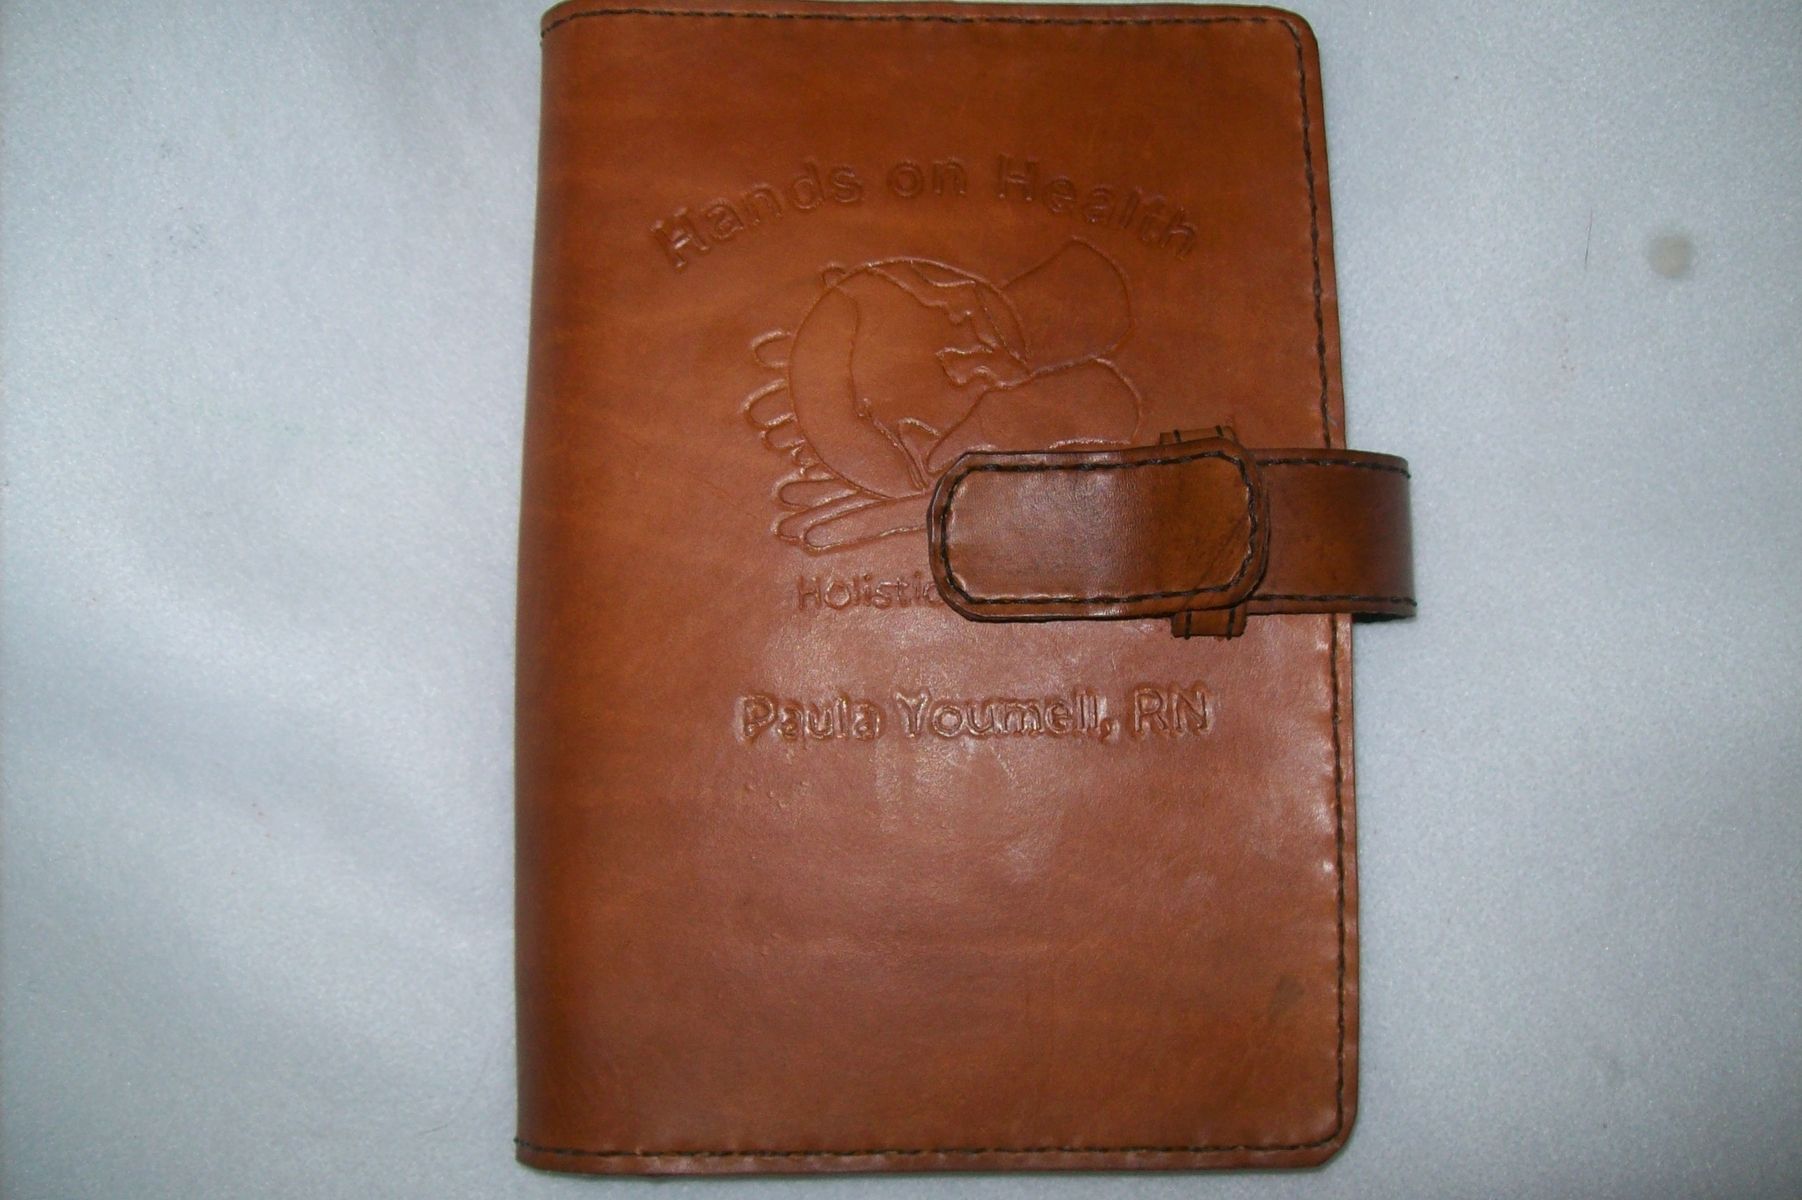 Buy Custom Leather Book Cover For Two Books, made to order from Kerry's  Custom Leather